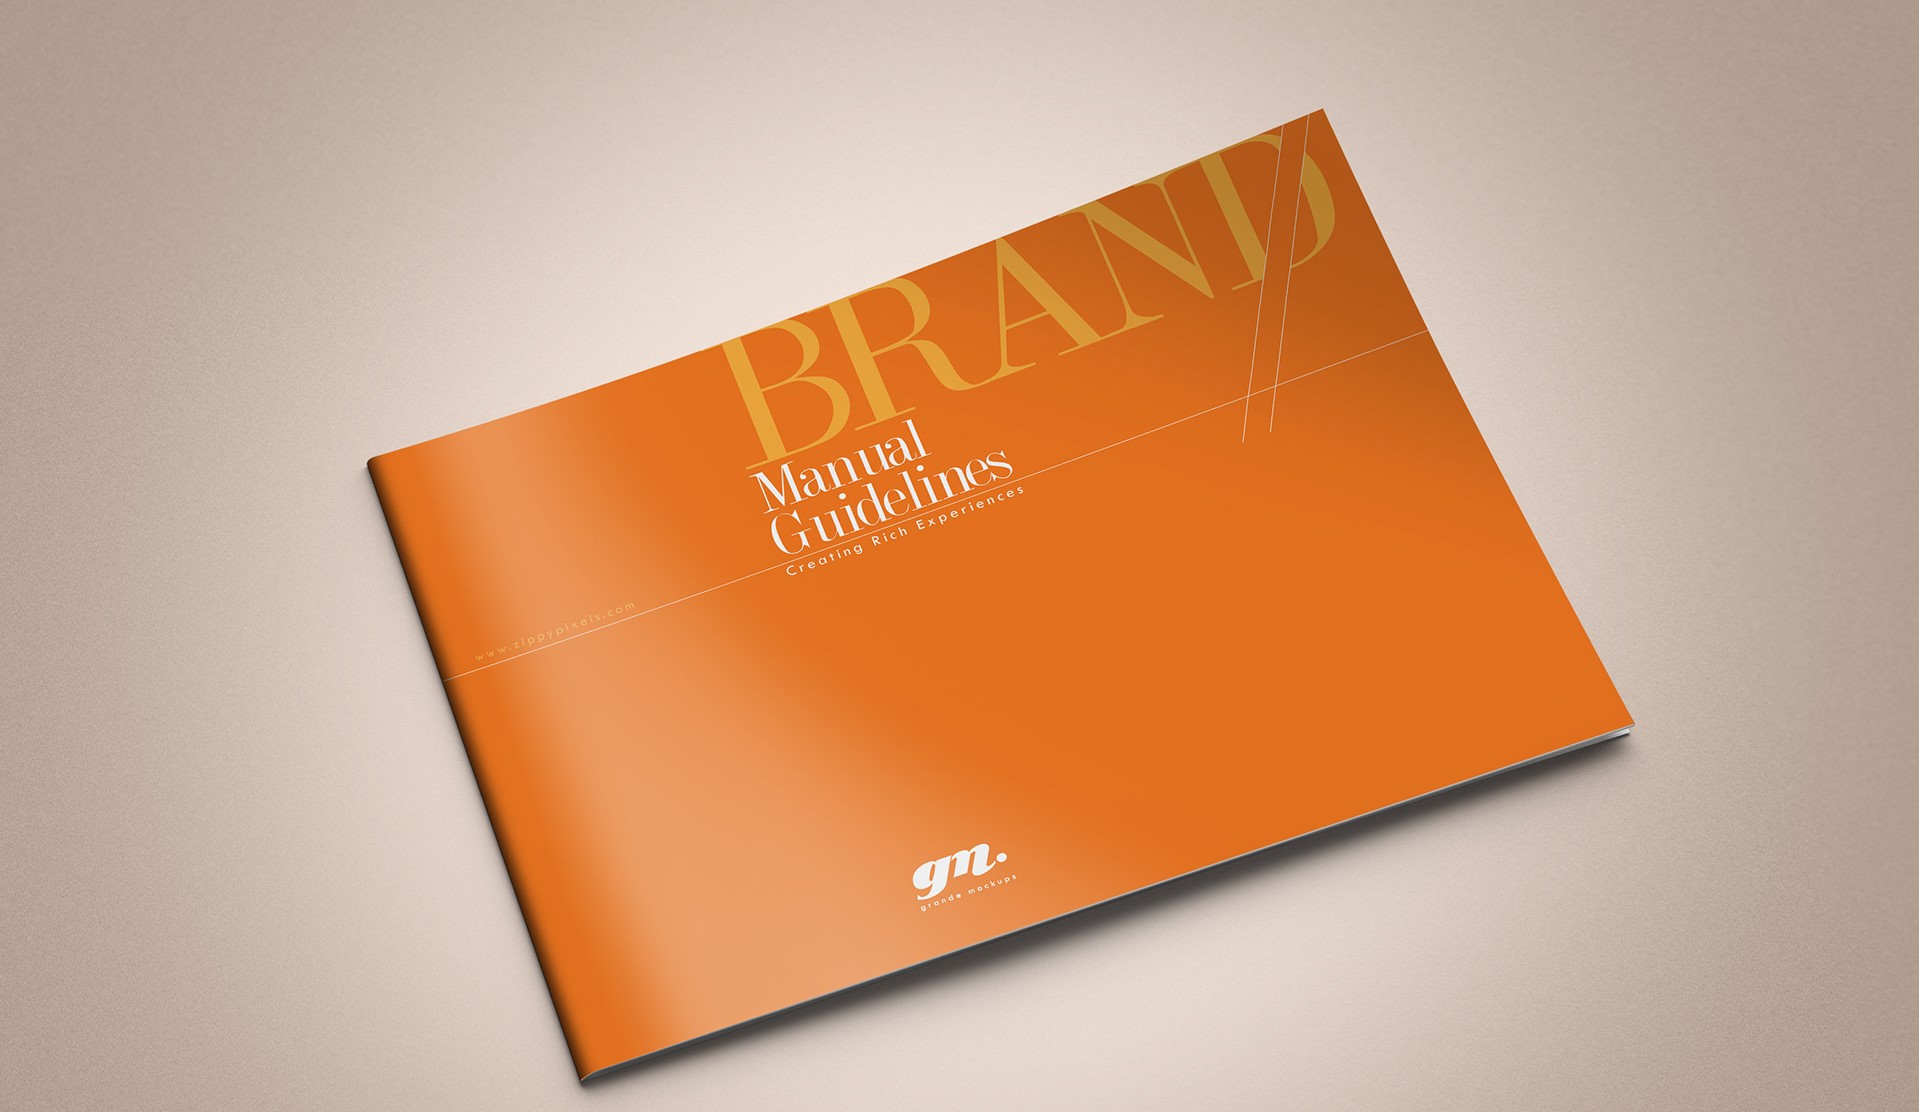 Brand book top cover